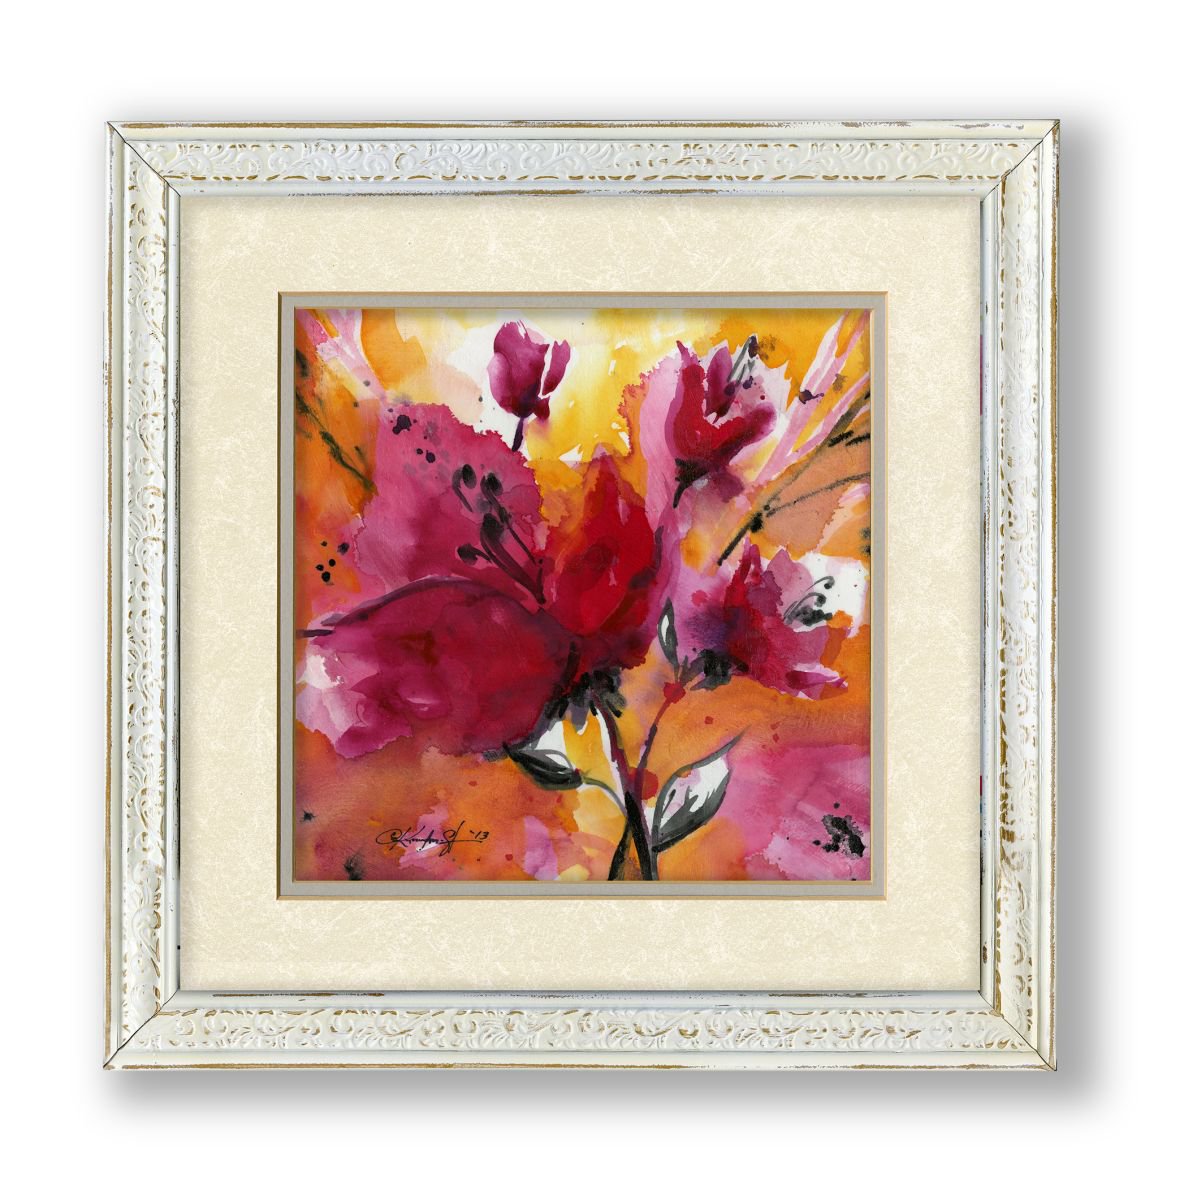 Floral Impressions 2 - Framed Abstract Poppy Floral by Kathy Morton Stanion by Kathy Morton Stanion